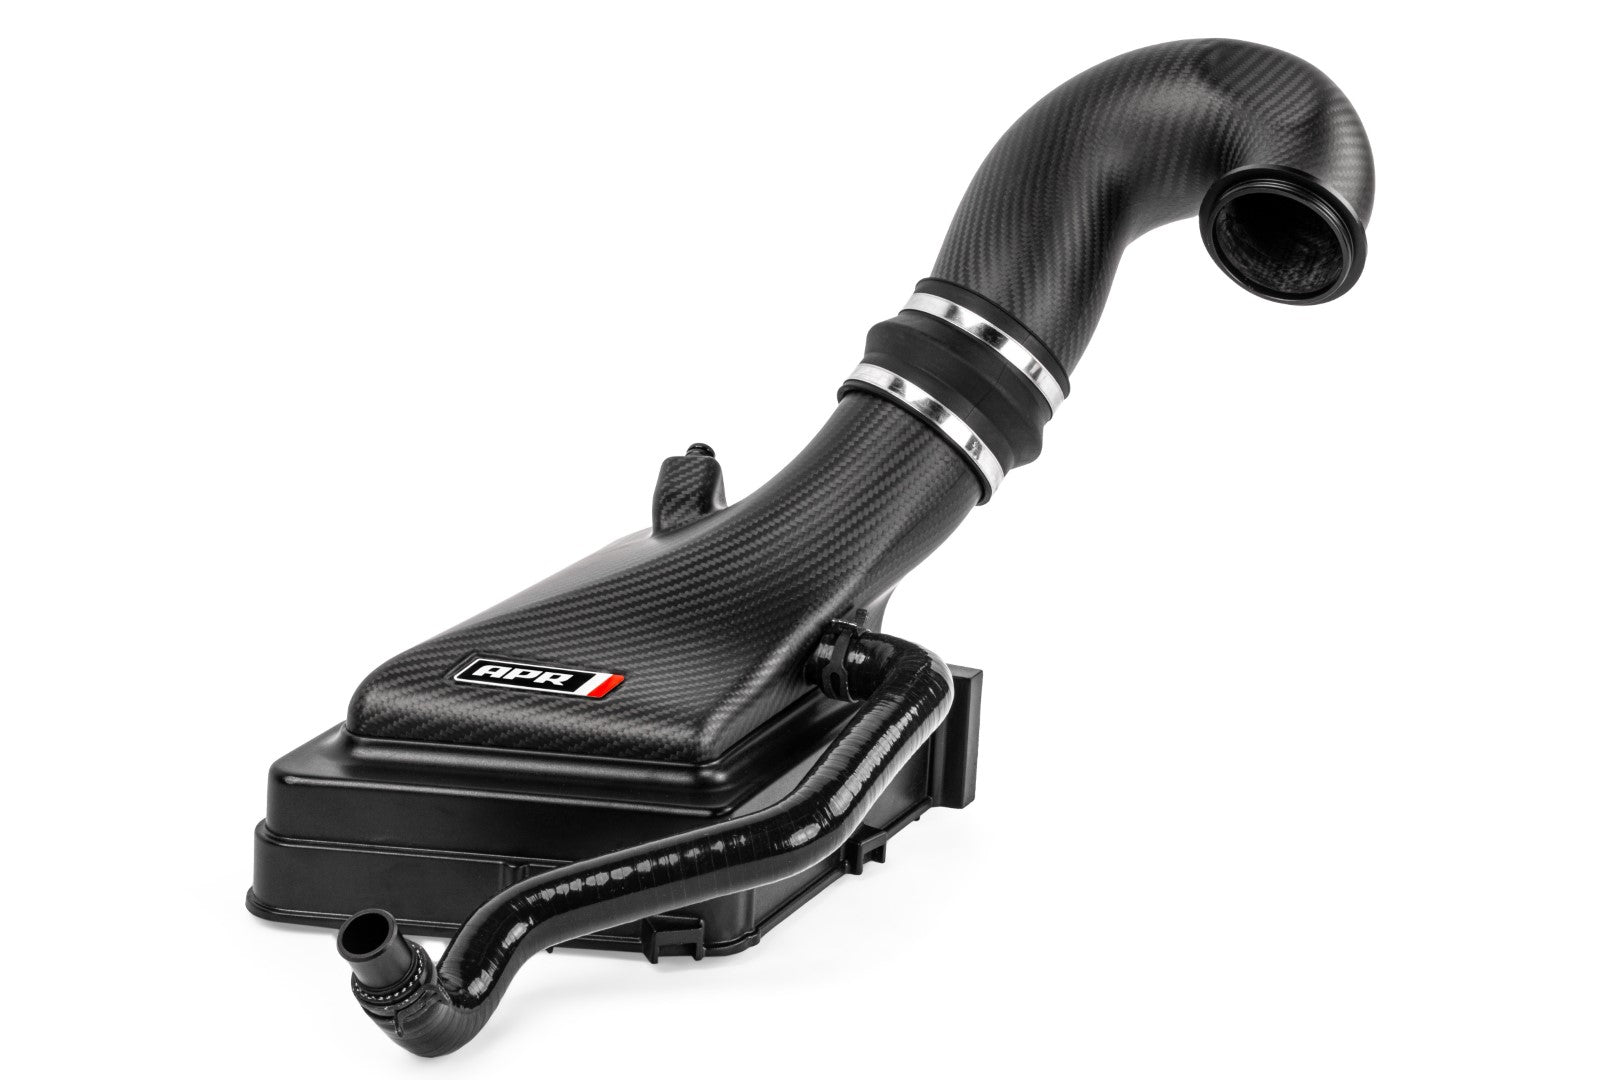 APR Carbon Fiber Intake System With Turbo Inlet Pipes - Porsche 992 911 3.0T/3.7T